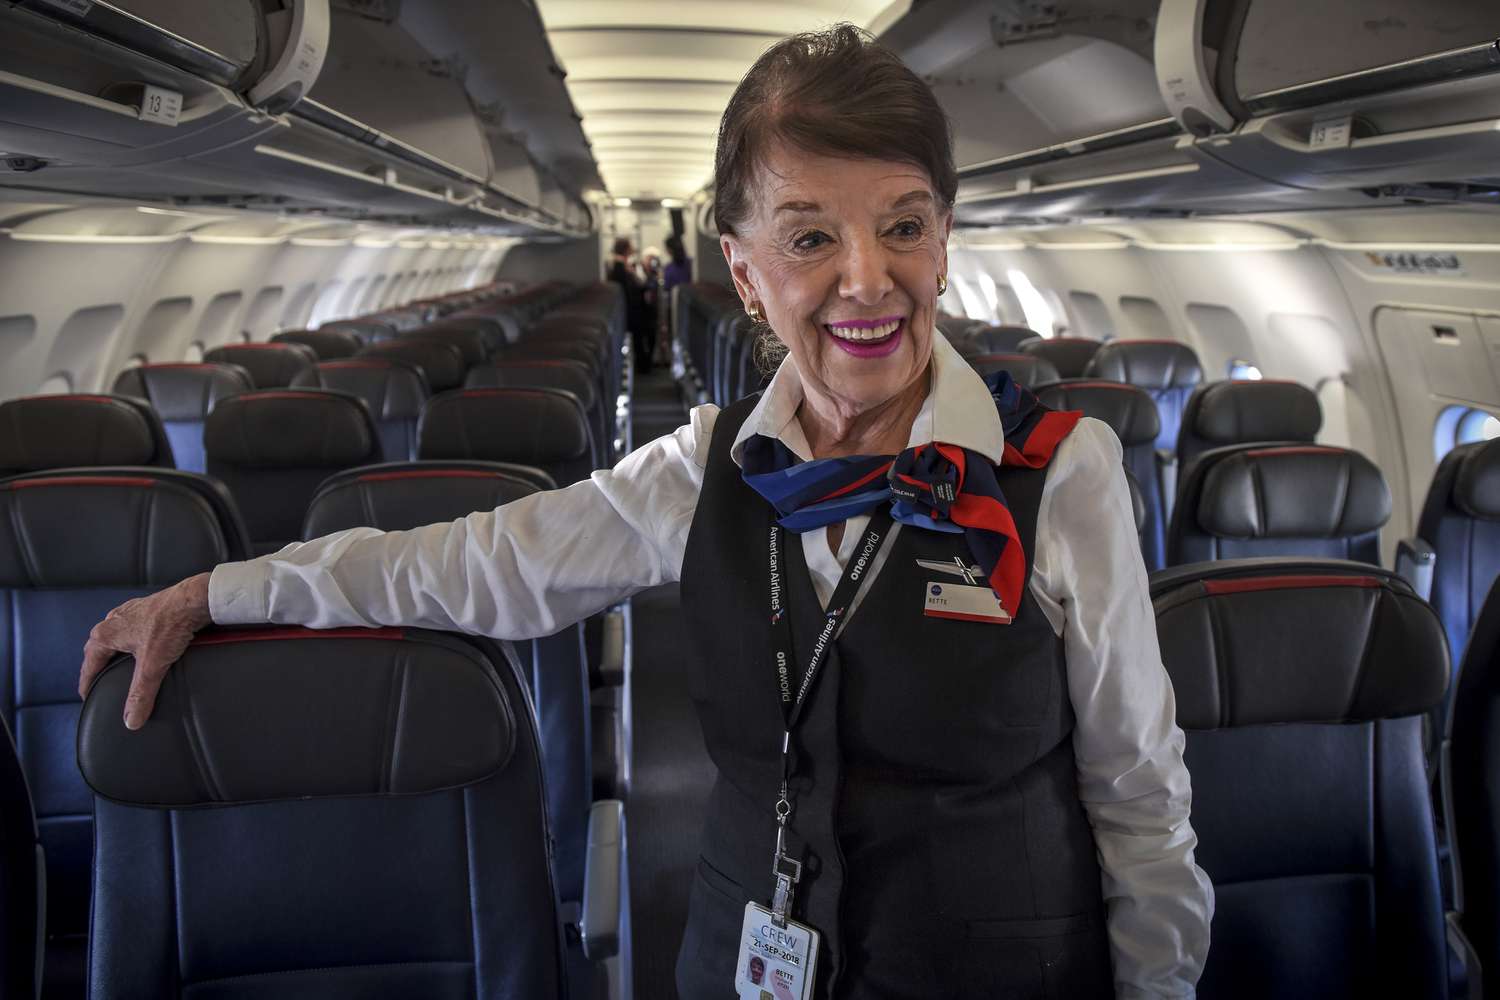 Longest Serving Flight Attendant Who 'Inspired Generations' Passes Away at 89